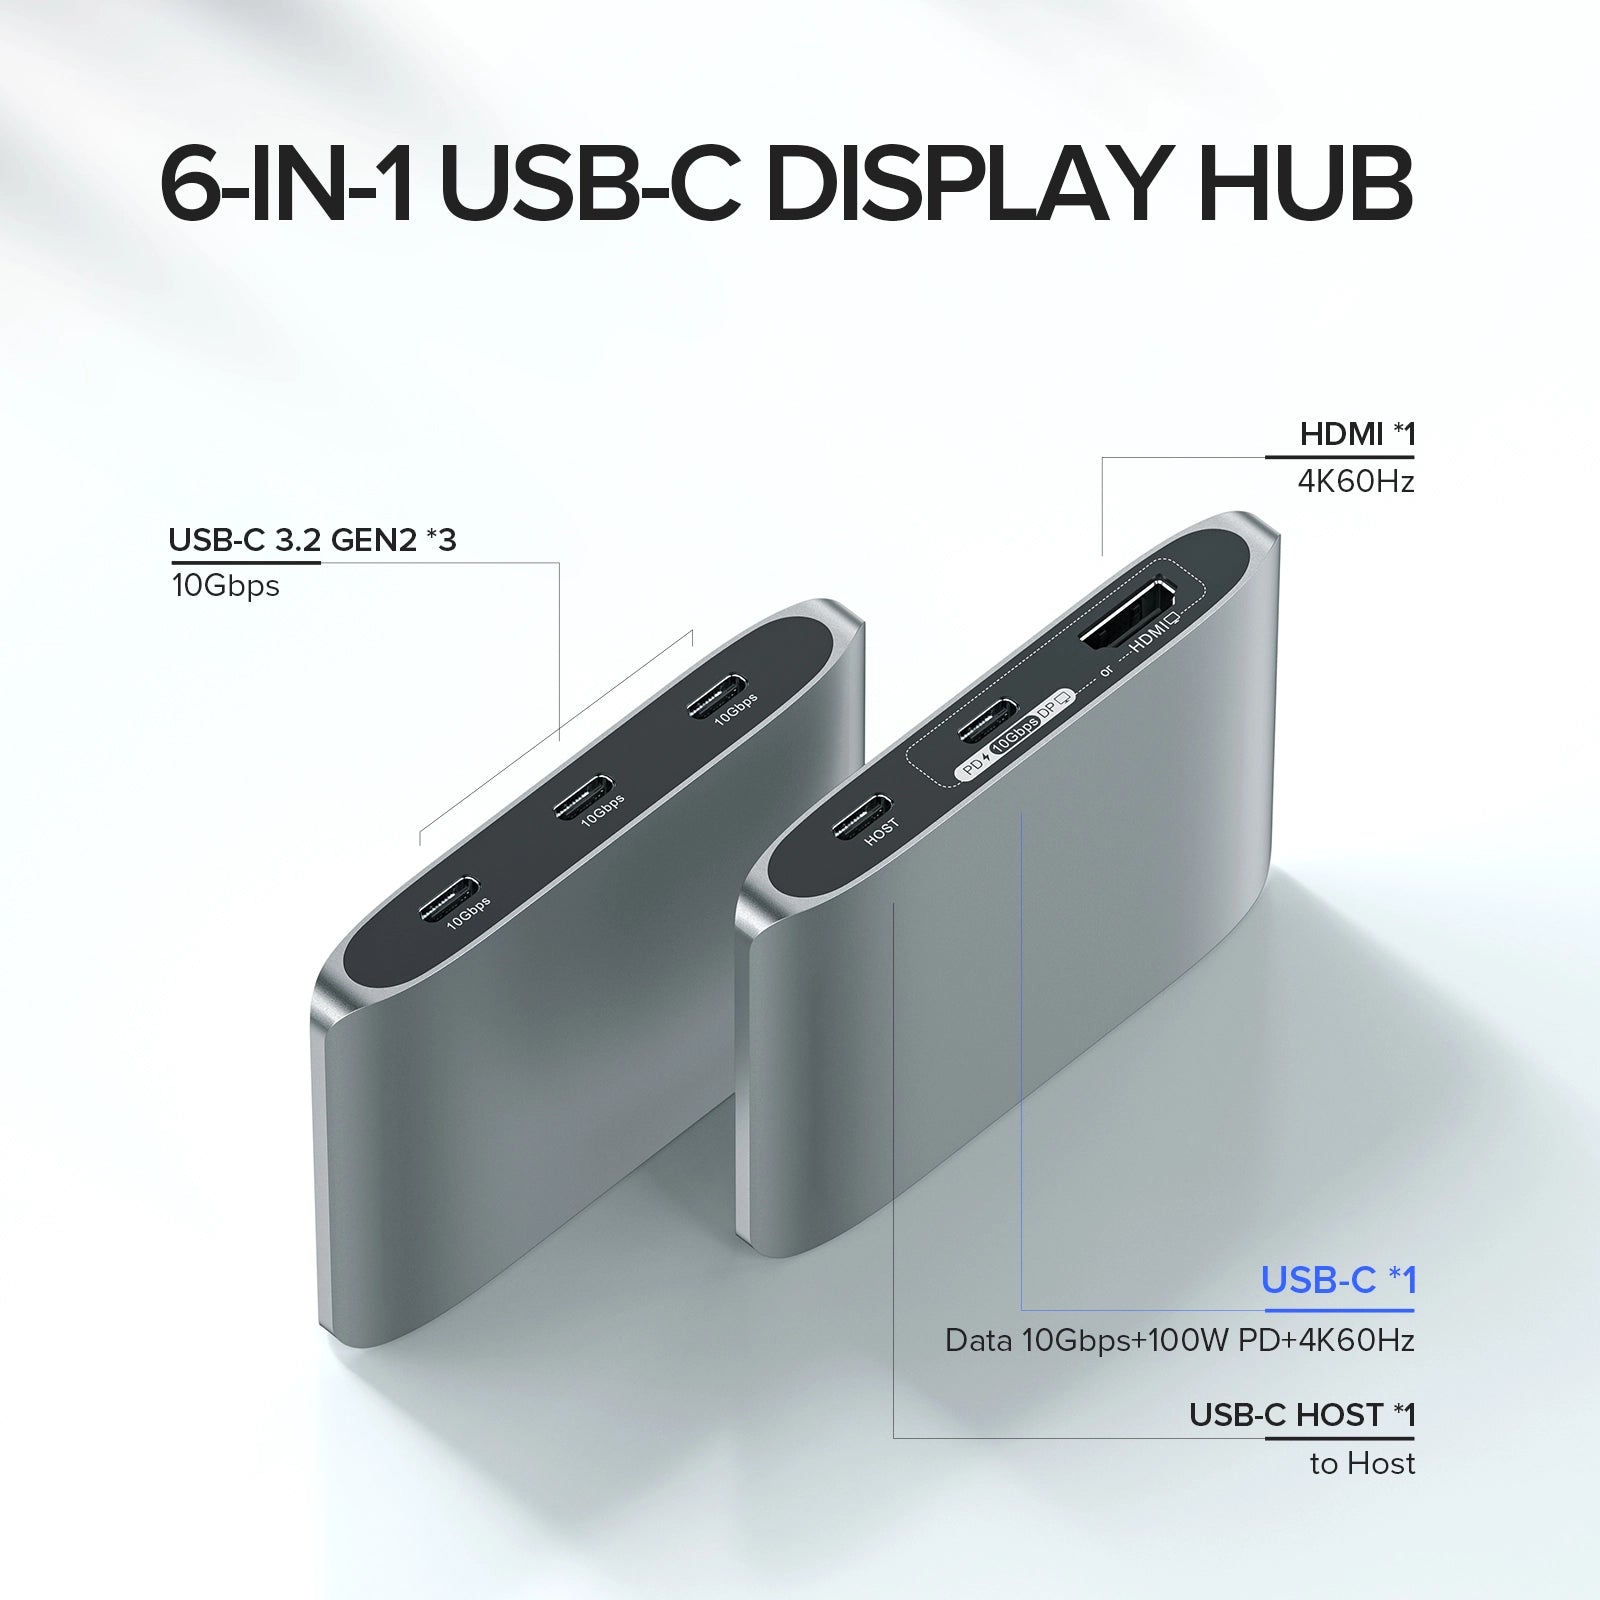 PULWTOP 6-in-1 USB C Hub with 4K HDMI,3 USB-C 10Gbps Data Ports, Full-Featured USB-C (100W PD+10Gbps Data Port+4K 60Hz Display)